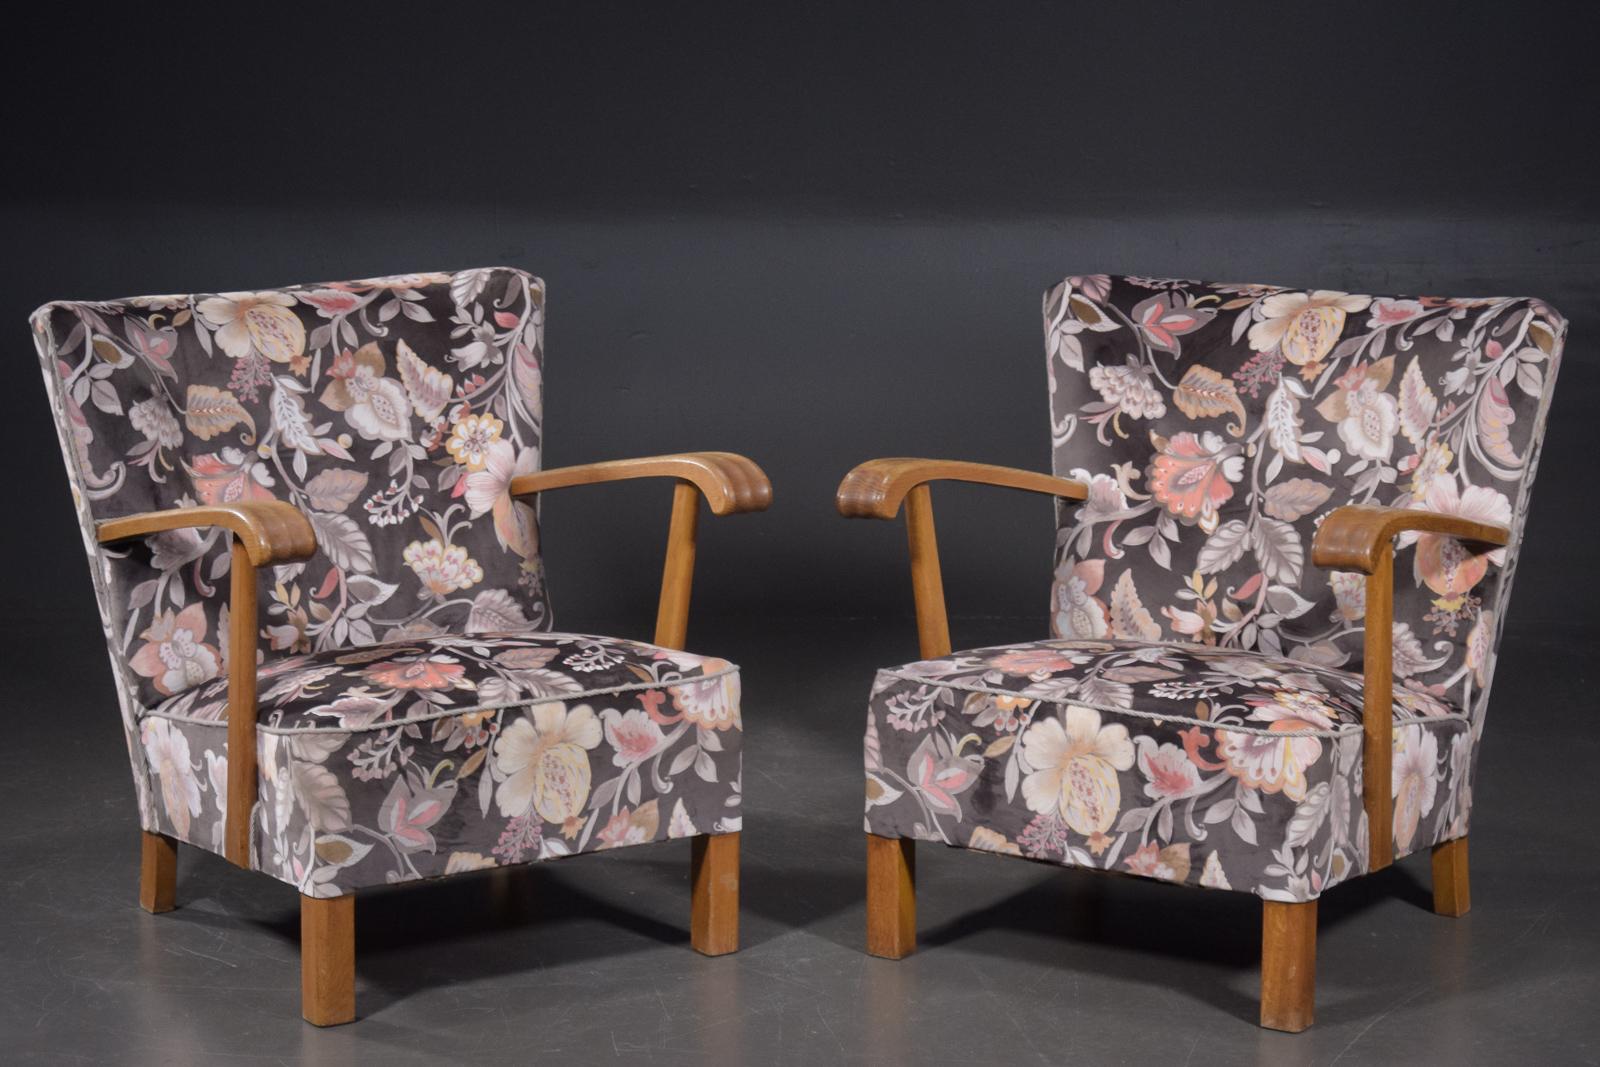 Pair of elegant and charming easy chairs from the late 1940svery typical of Fritz Hansen's design style both in terms of legs and armrests leading many dealers in Denmark to believe the chairs are indeed by Fritz Hansen. But nobody knows for sure.